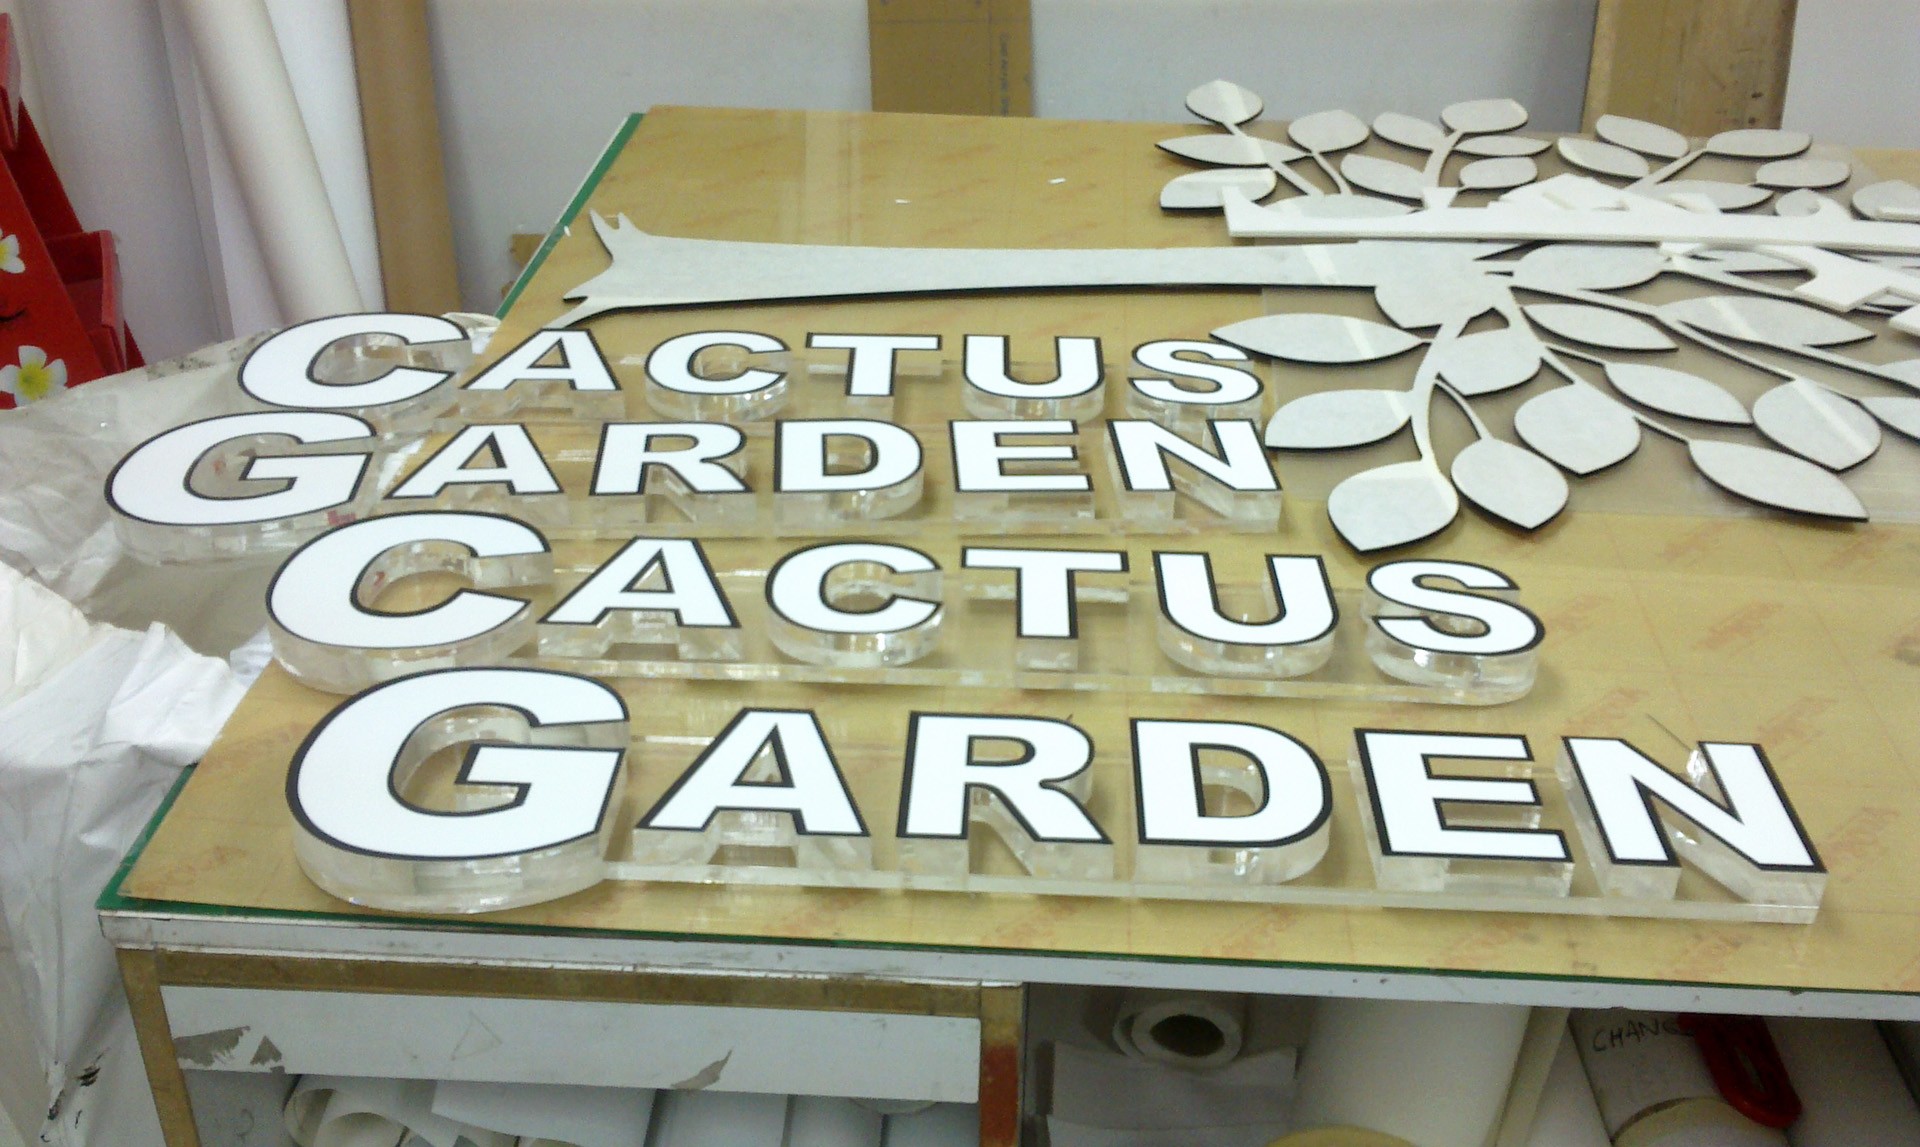 laser cut cutting acrylic engraving wood foam 3d services leather cactus letter mdf layers parts singapore carve shapes customized hill